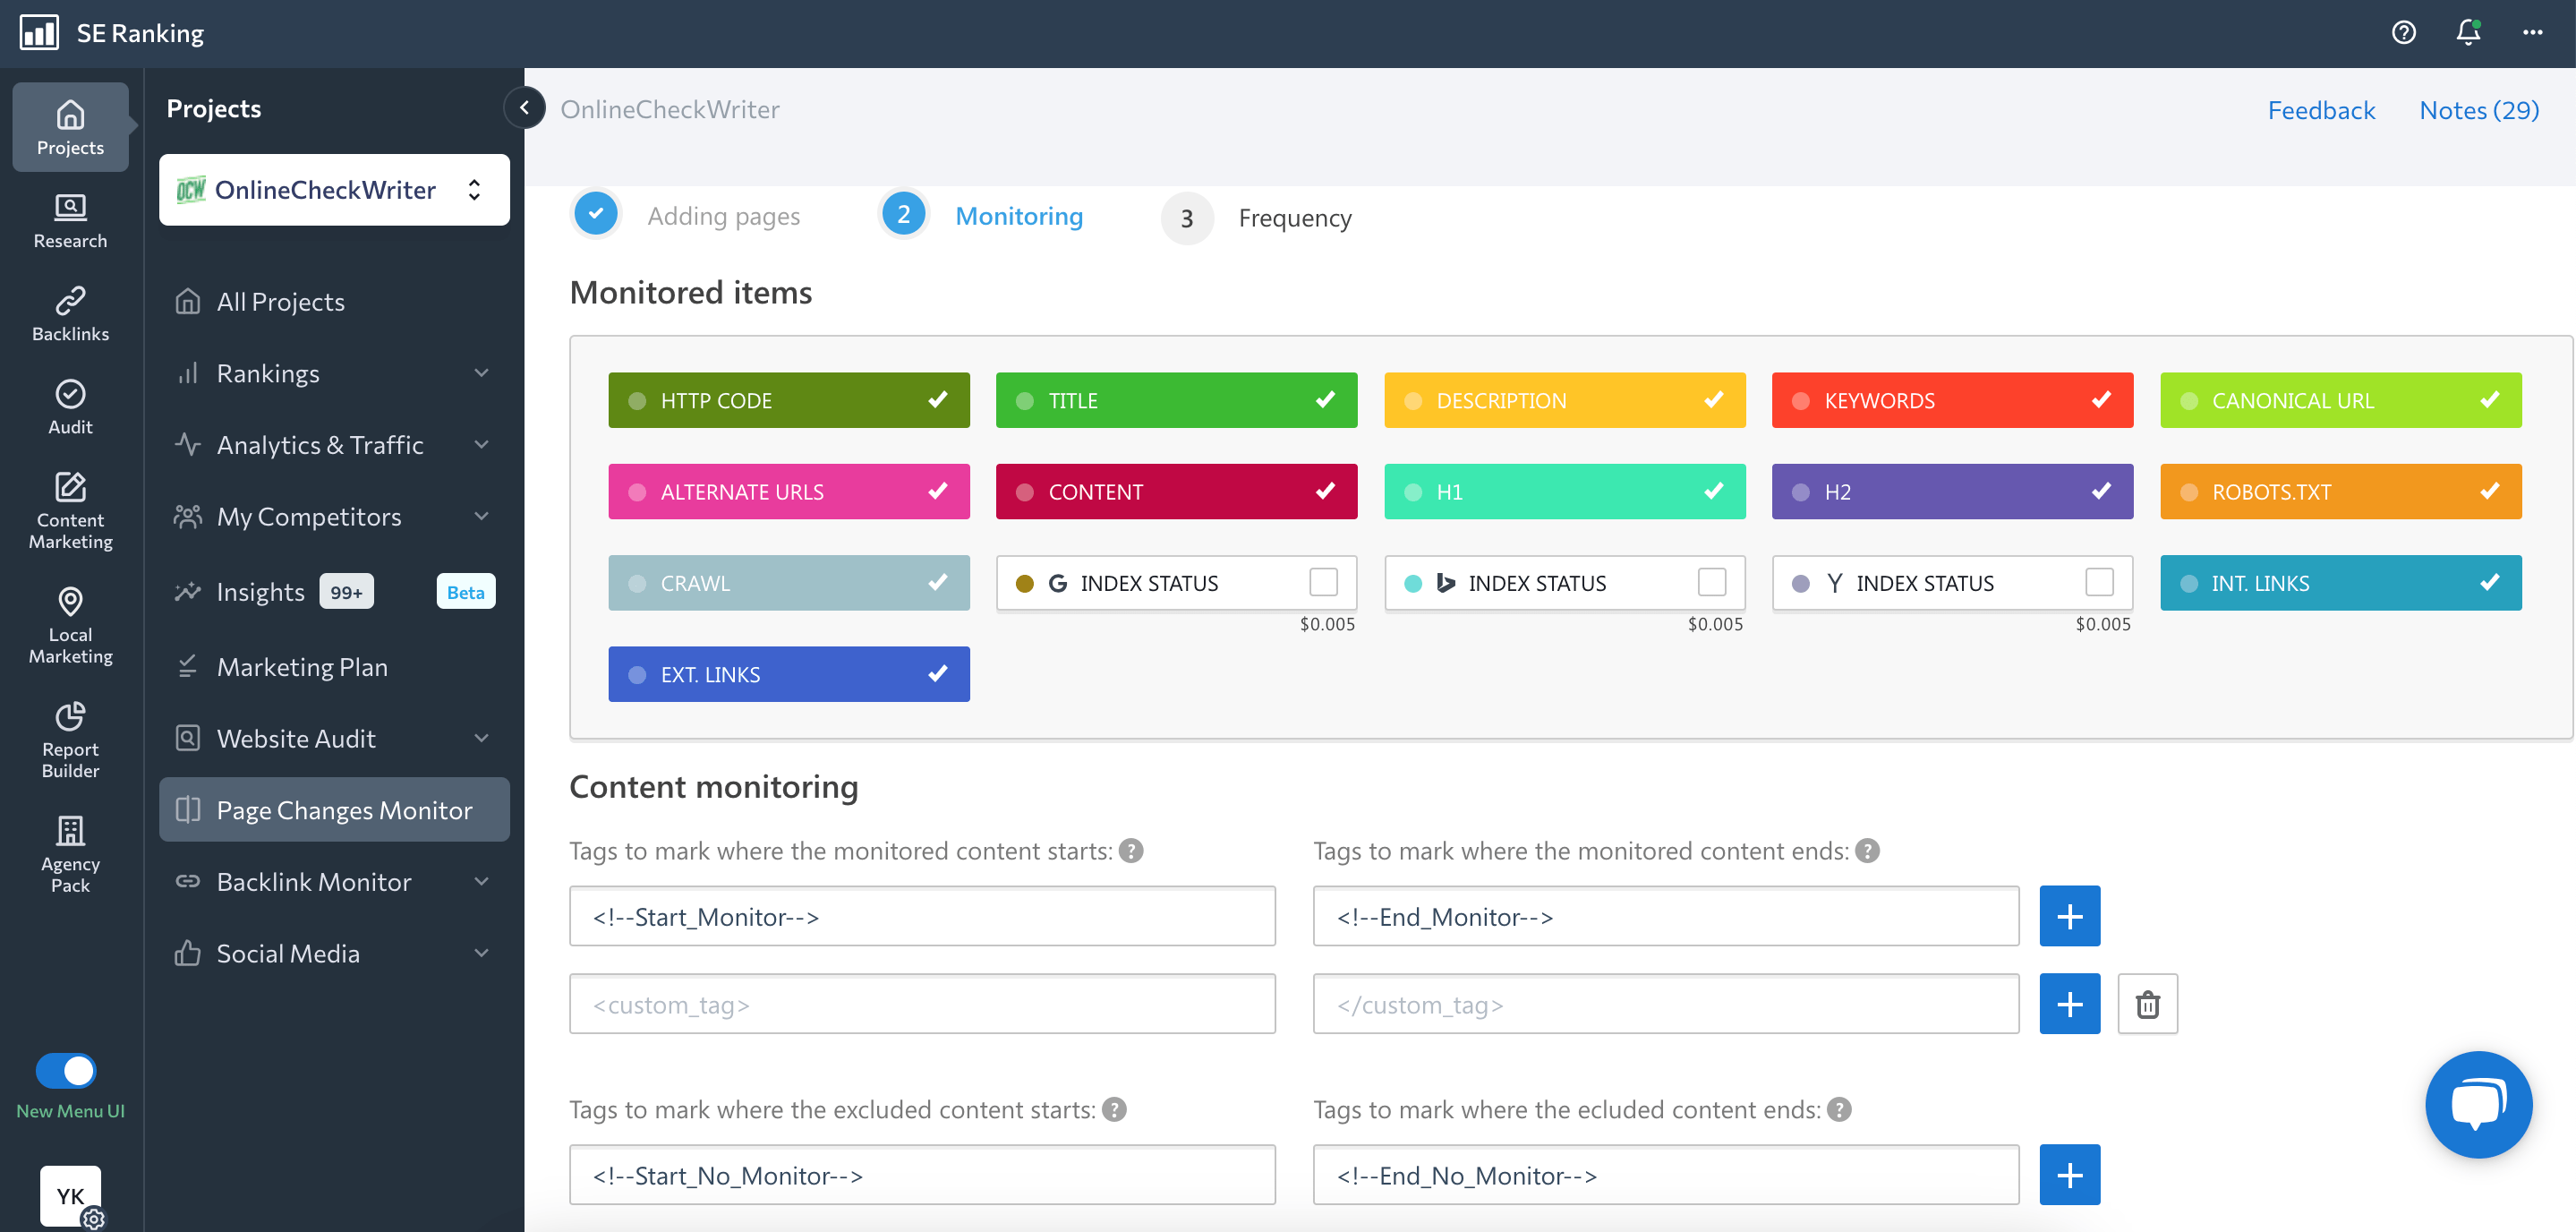 Page Changed Monitoring in SE Ranking